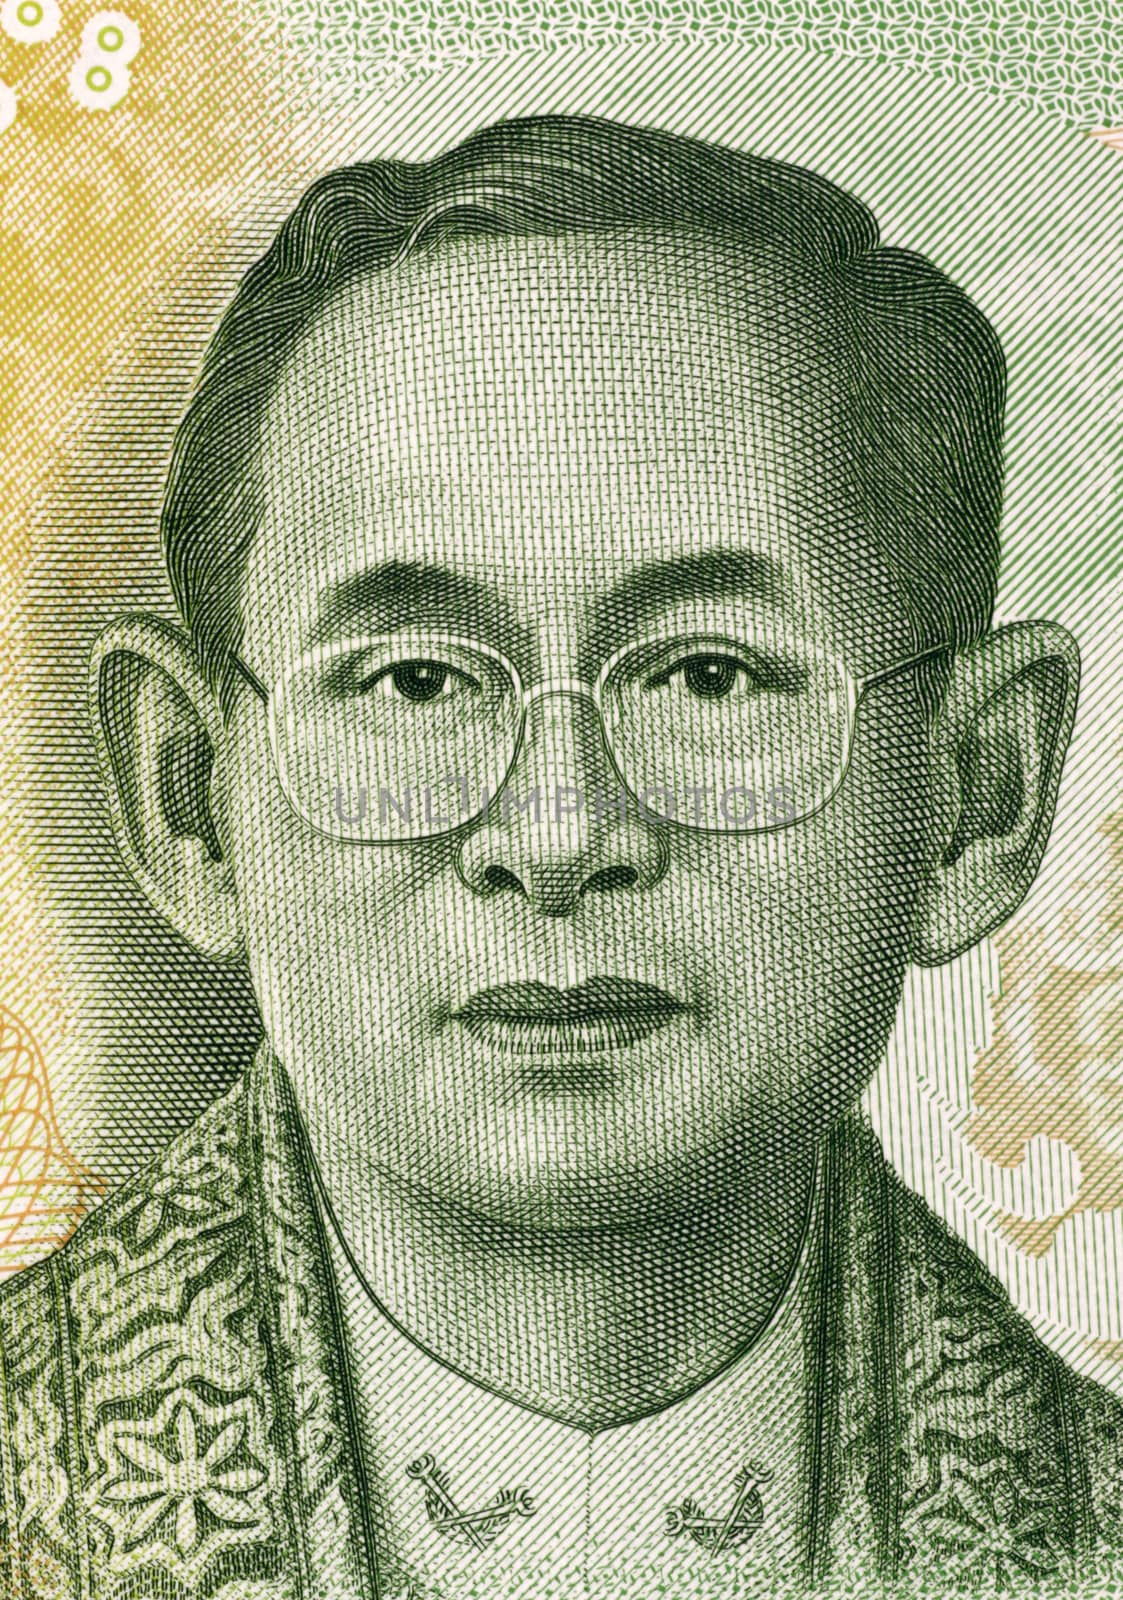 King Rama IX (born 1927) on 20 Baht 2013 Banknote from Thailand. King of Thailand.